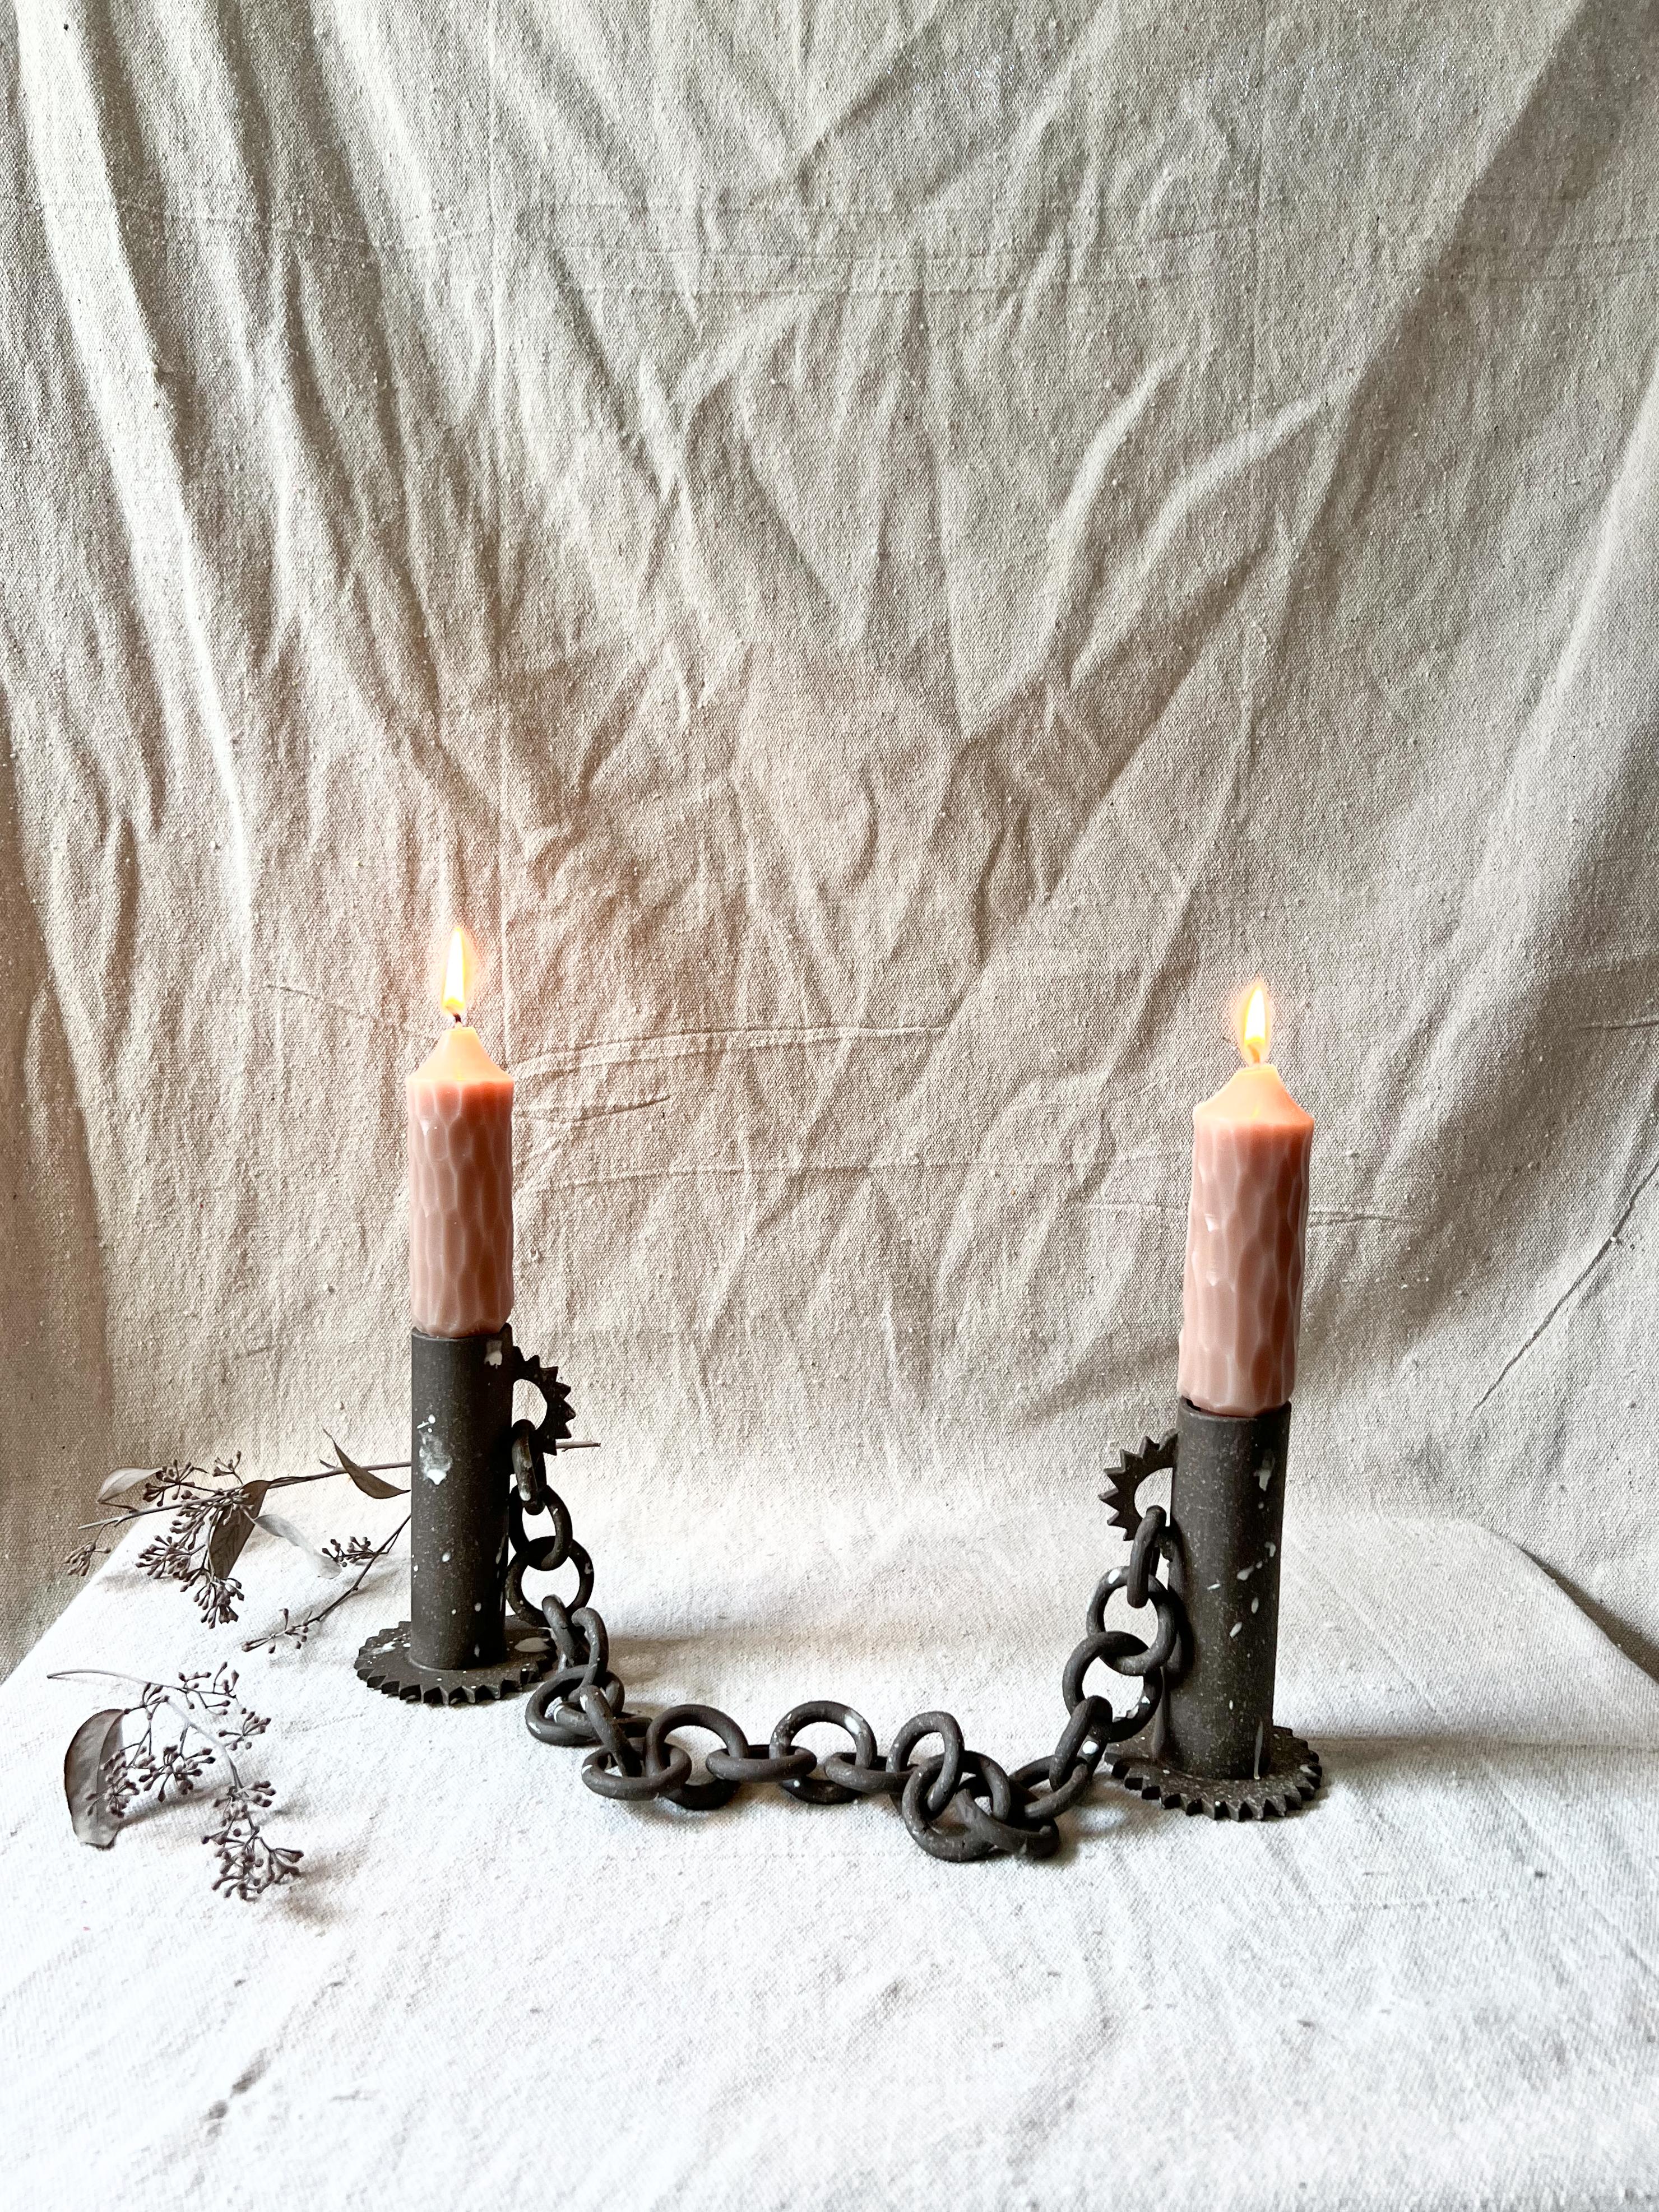 Two hand-built sculptural stoneware candlestick holders connected with a ceramic chain exude an eclectic charm, blending organic forms with functional design. These one of a kind candle holders boast individualistic character and artisanal